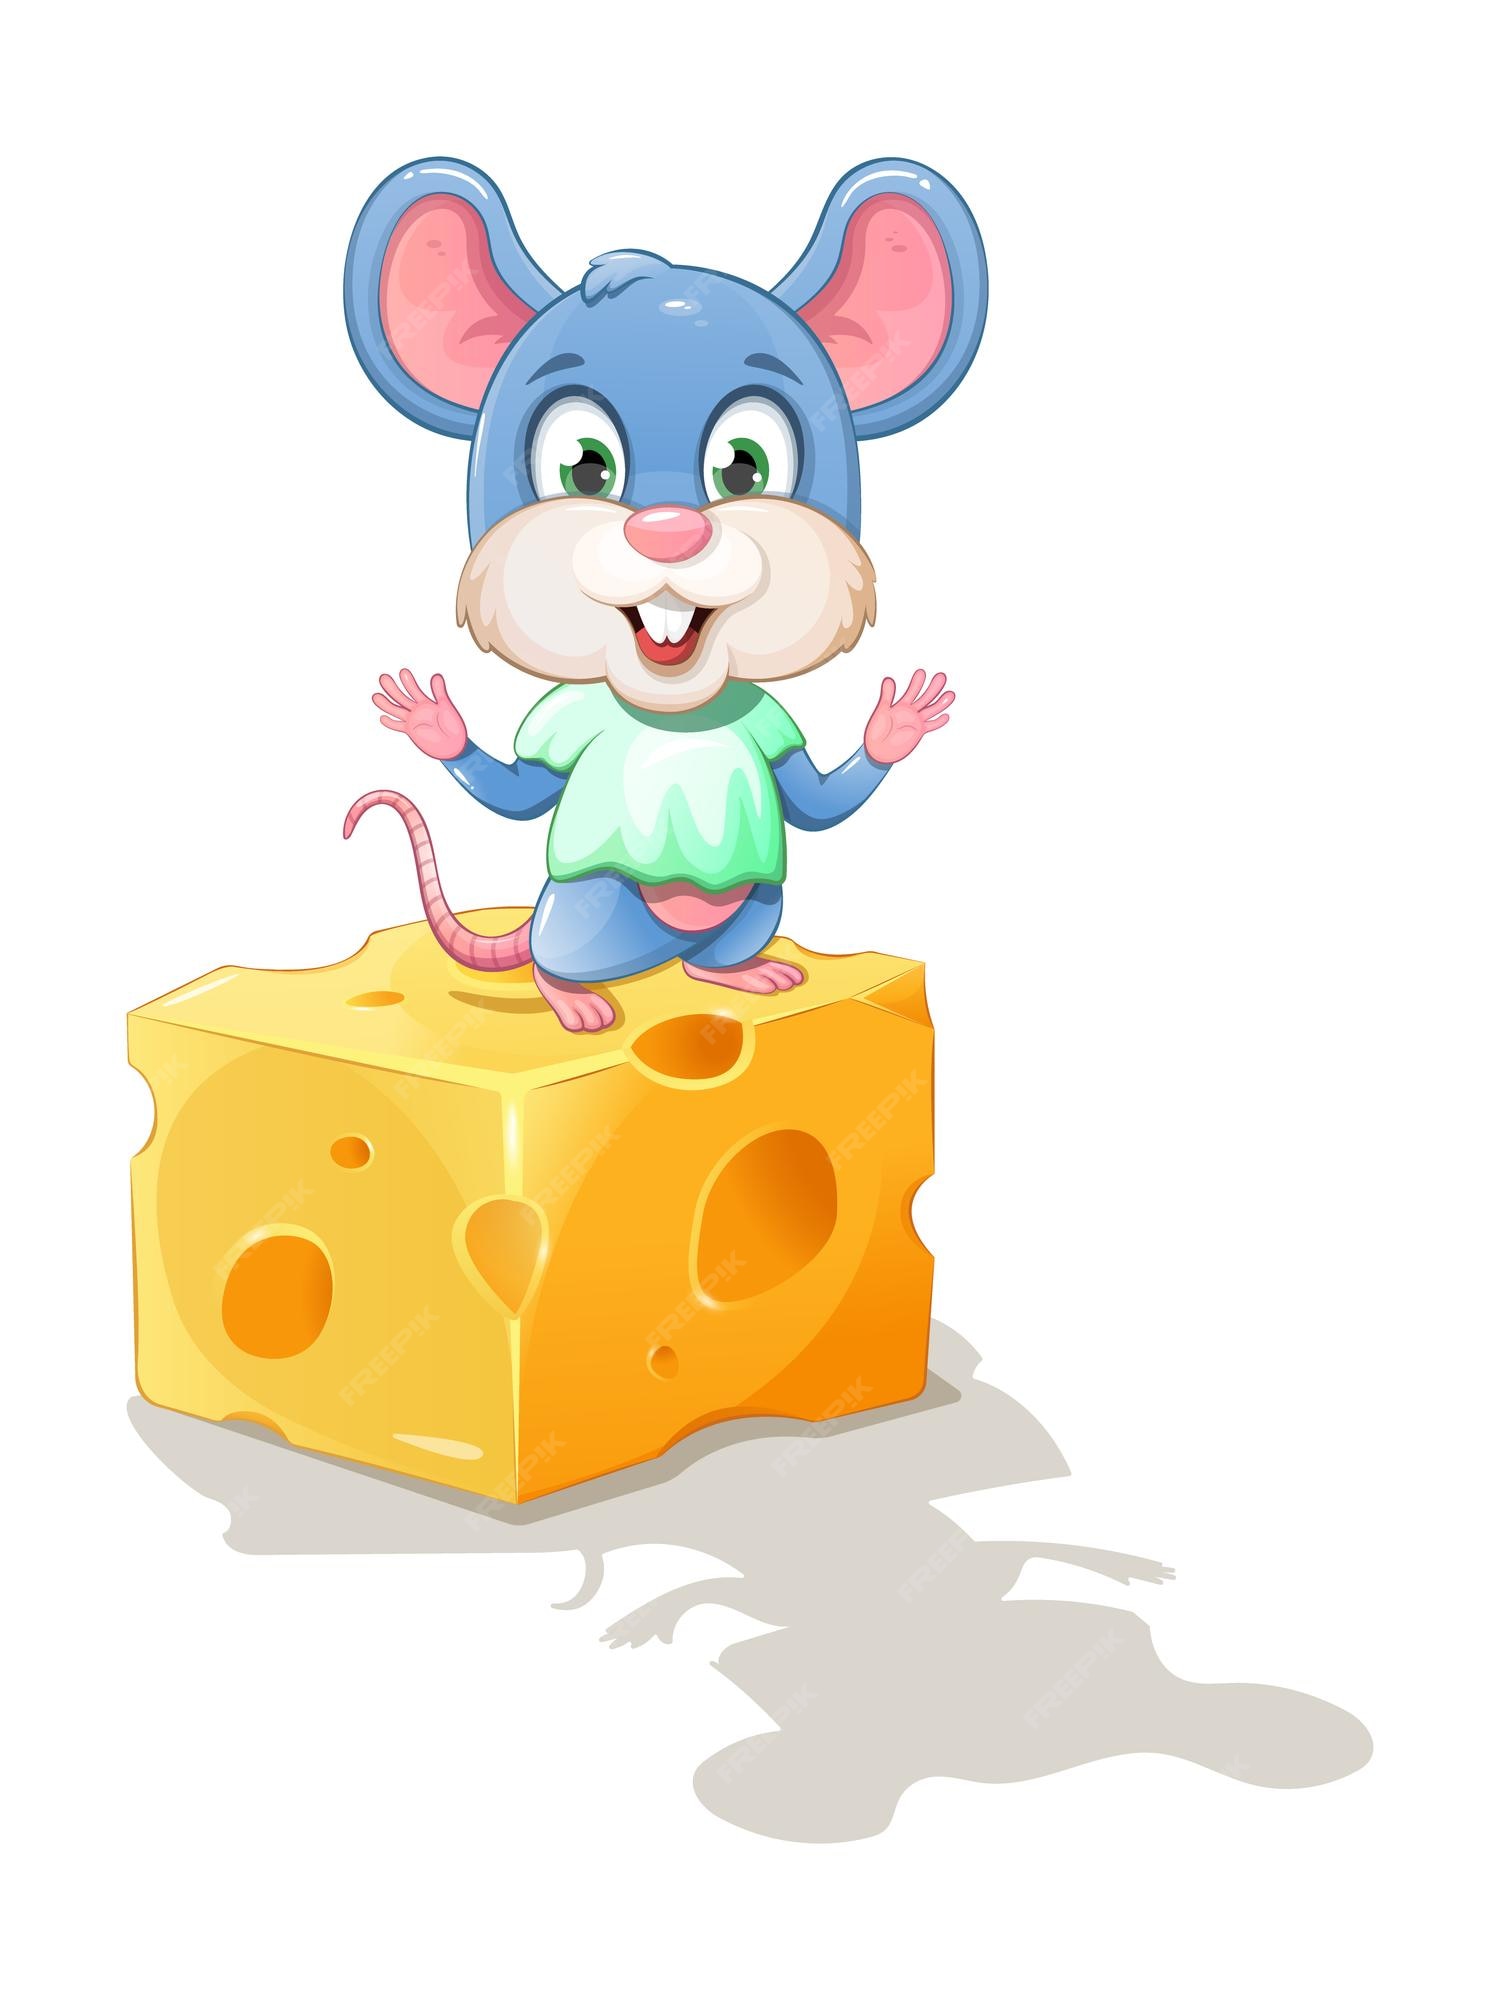 Cute Cartoon Mouse Images - Free Download on Freepik